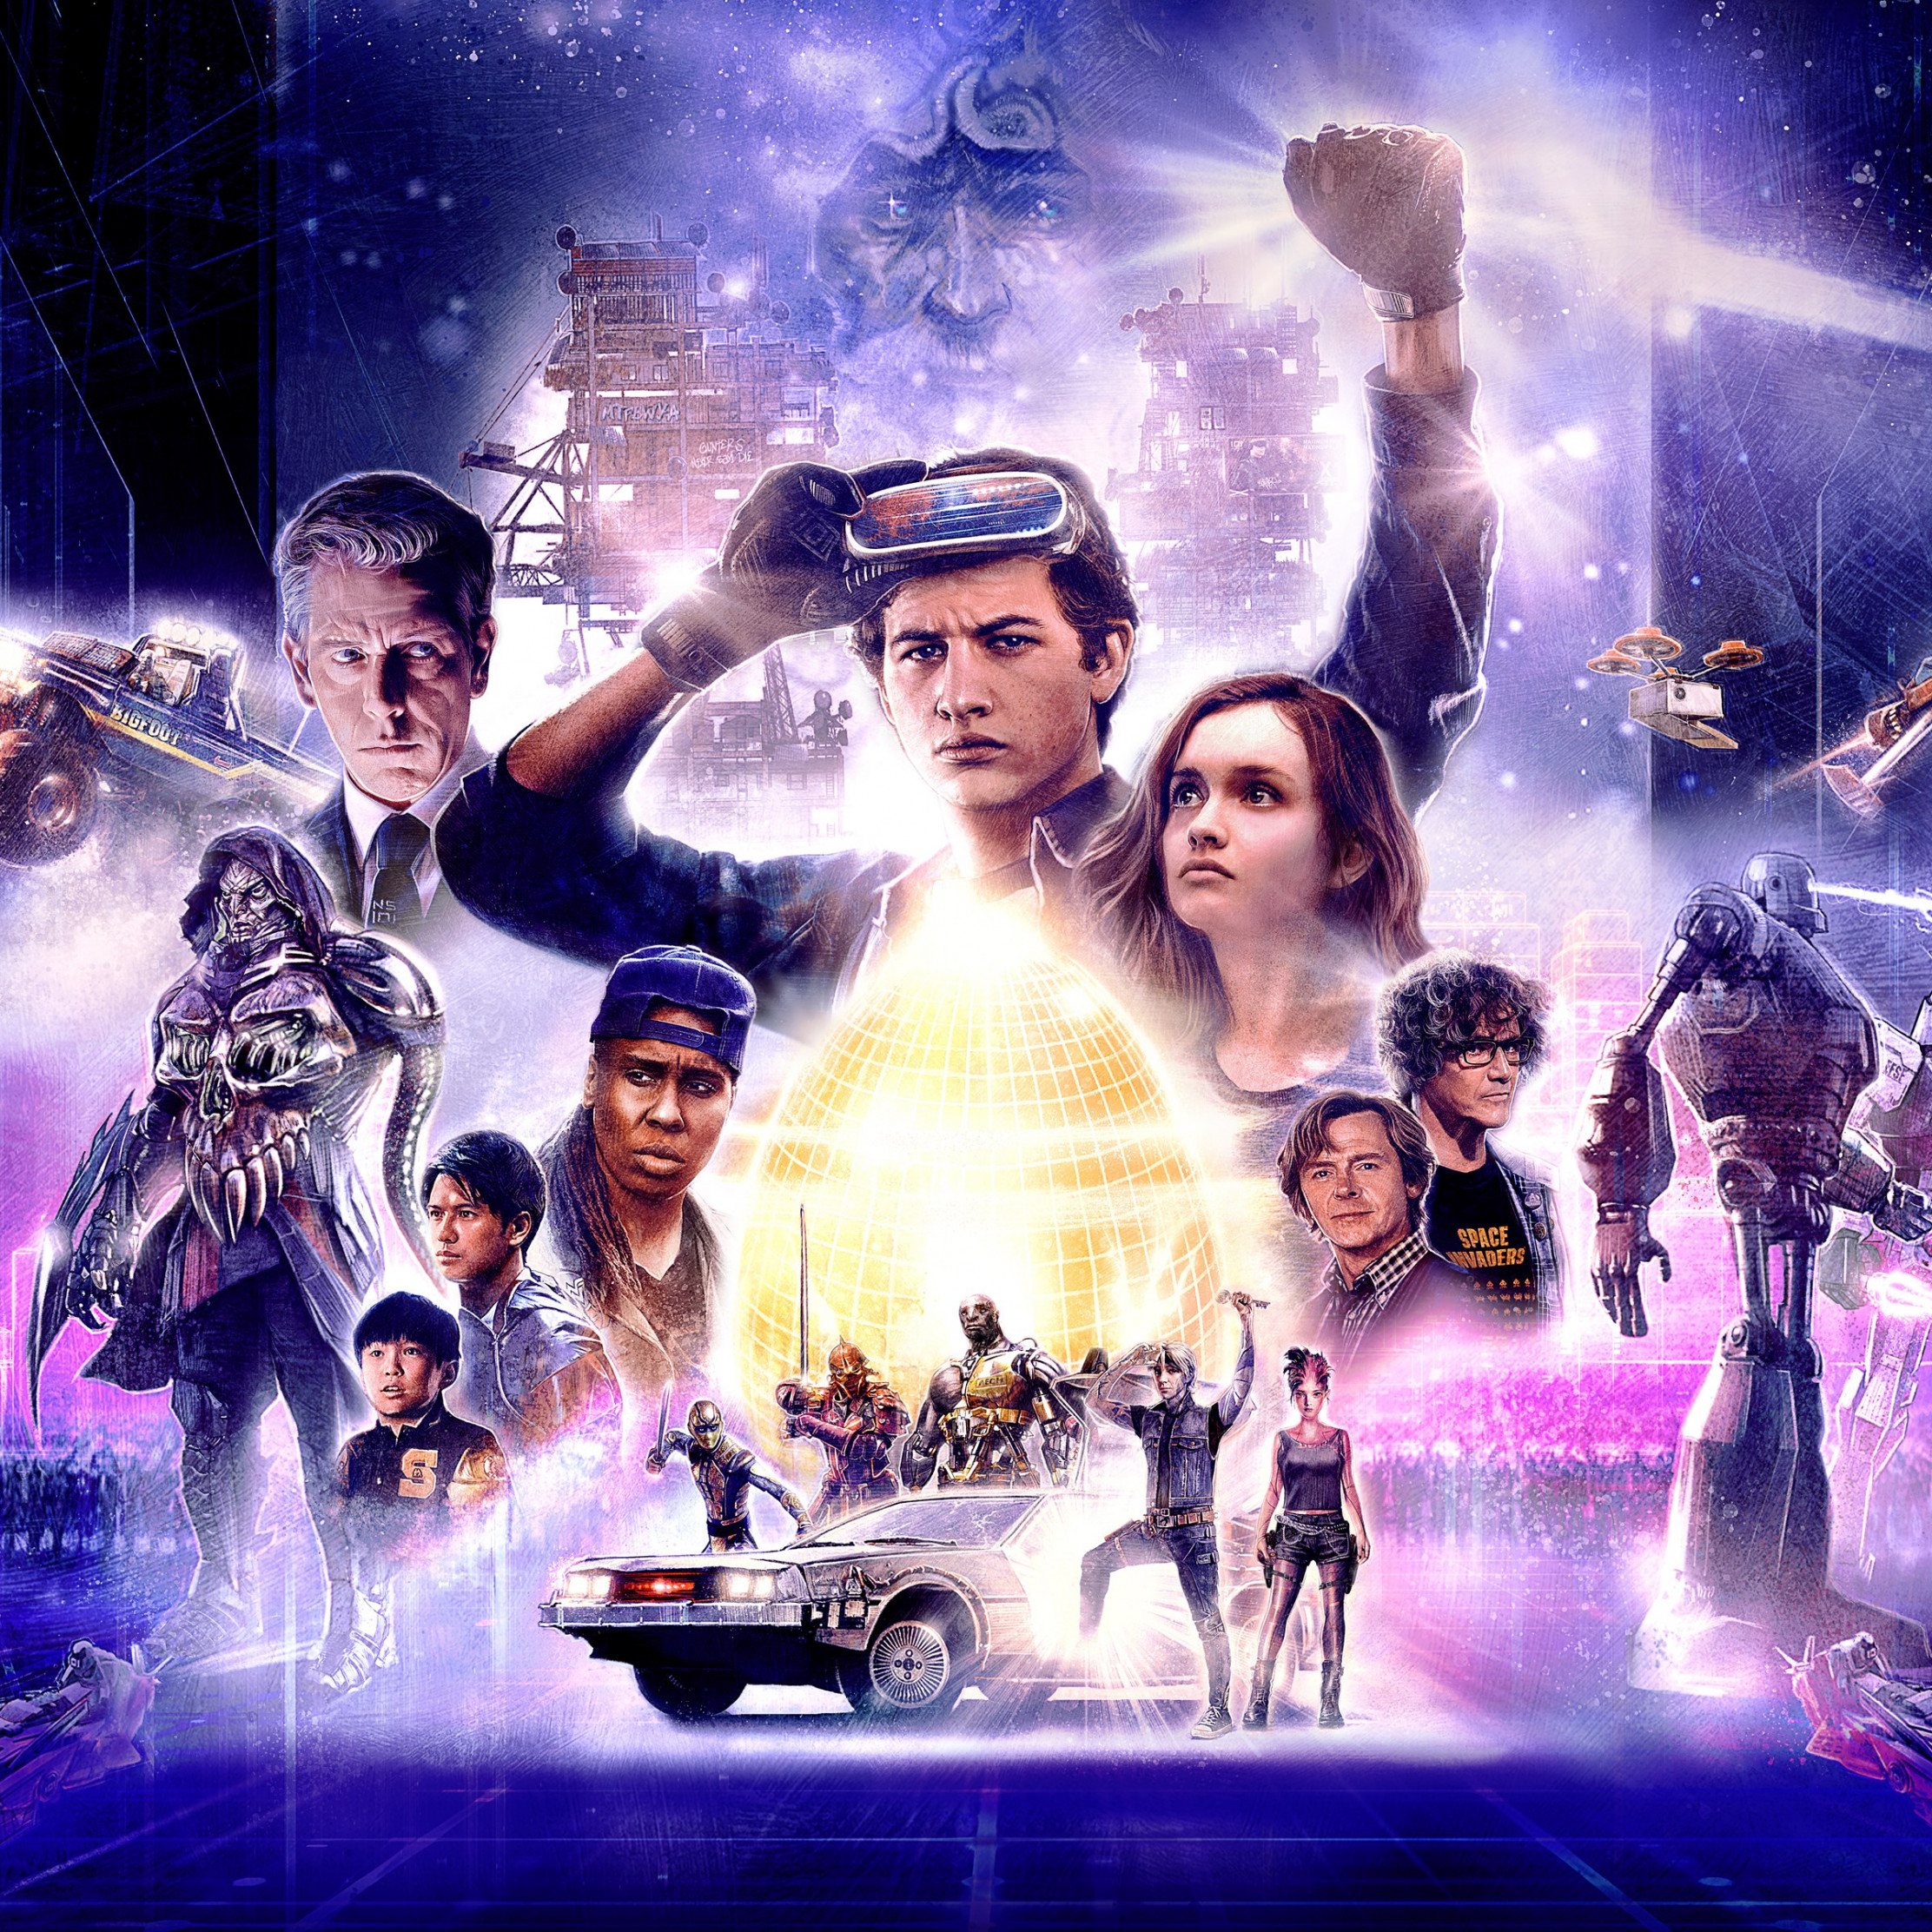 Ready Player One poster wallpaper 2224x2224